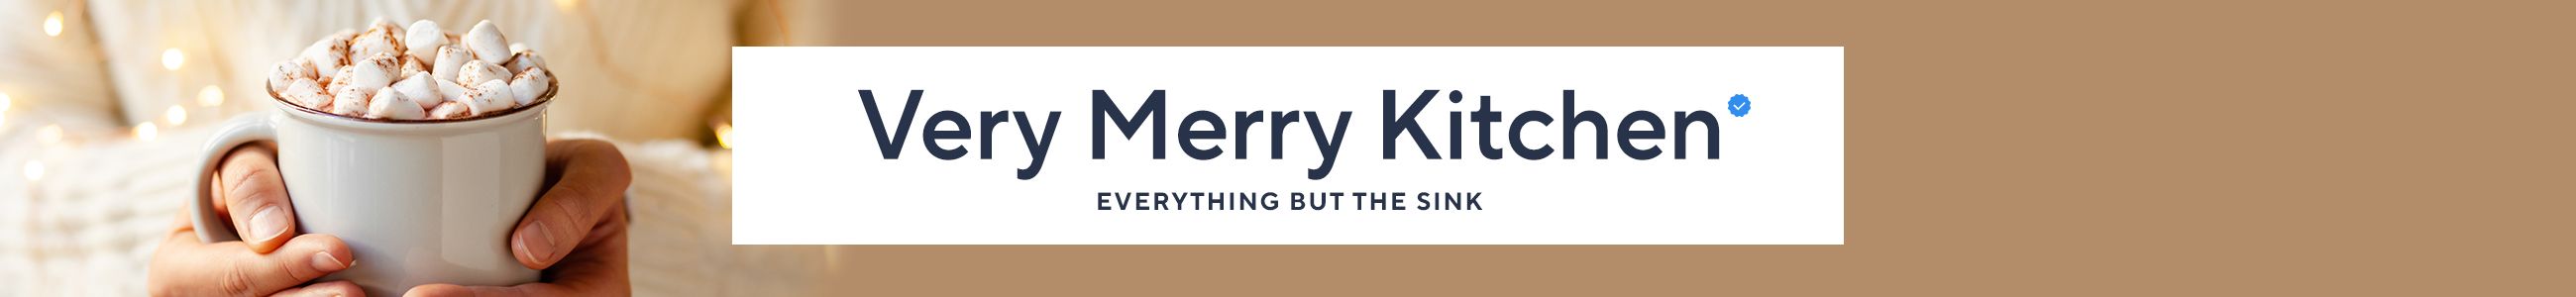 Very Merry Kitchen Everything but the Sink